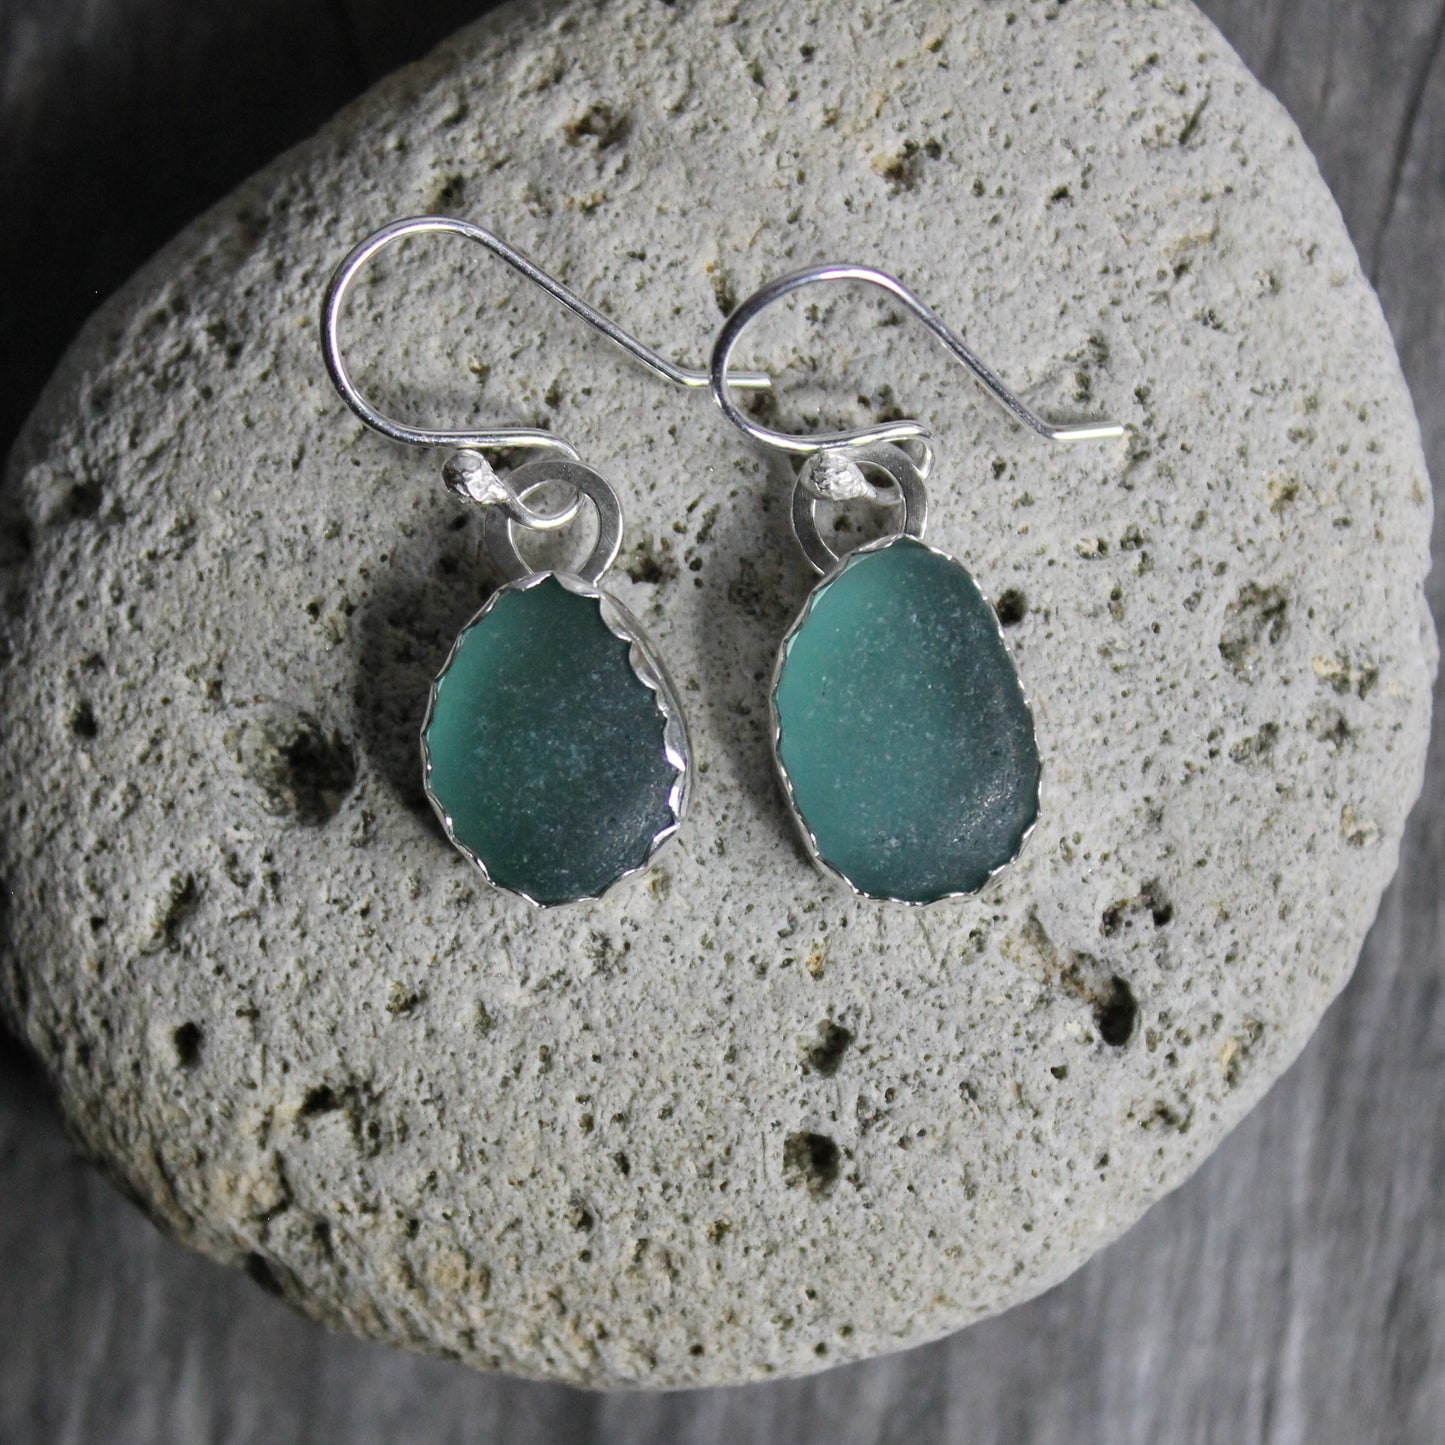 Dark teal sea glass set in a fine and sterling silver scalloped bezel setting and attached to handmade ear wires.  